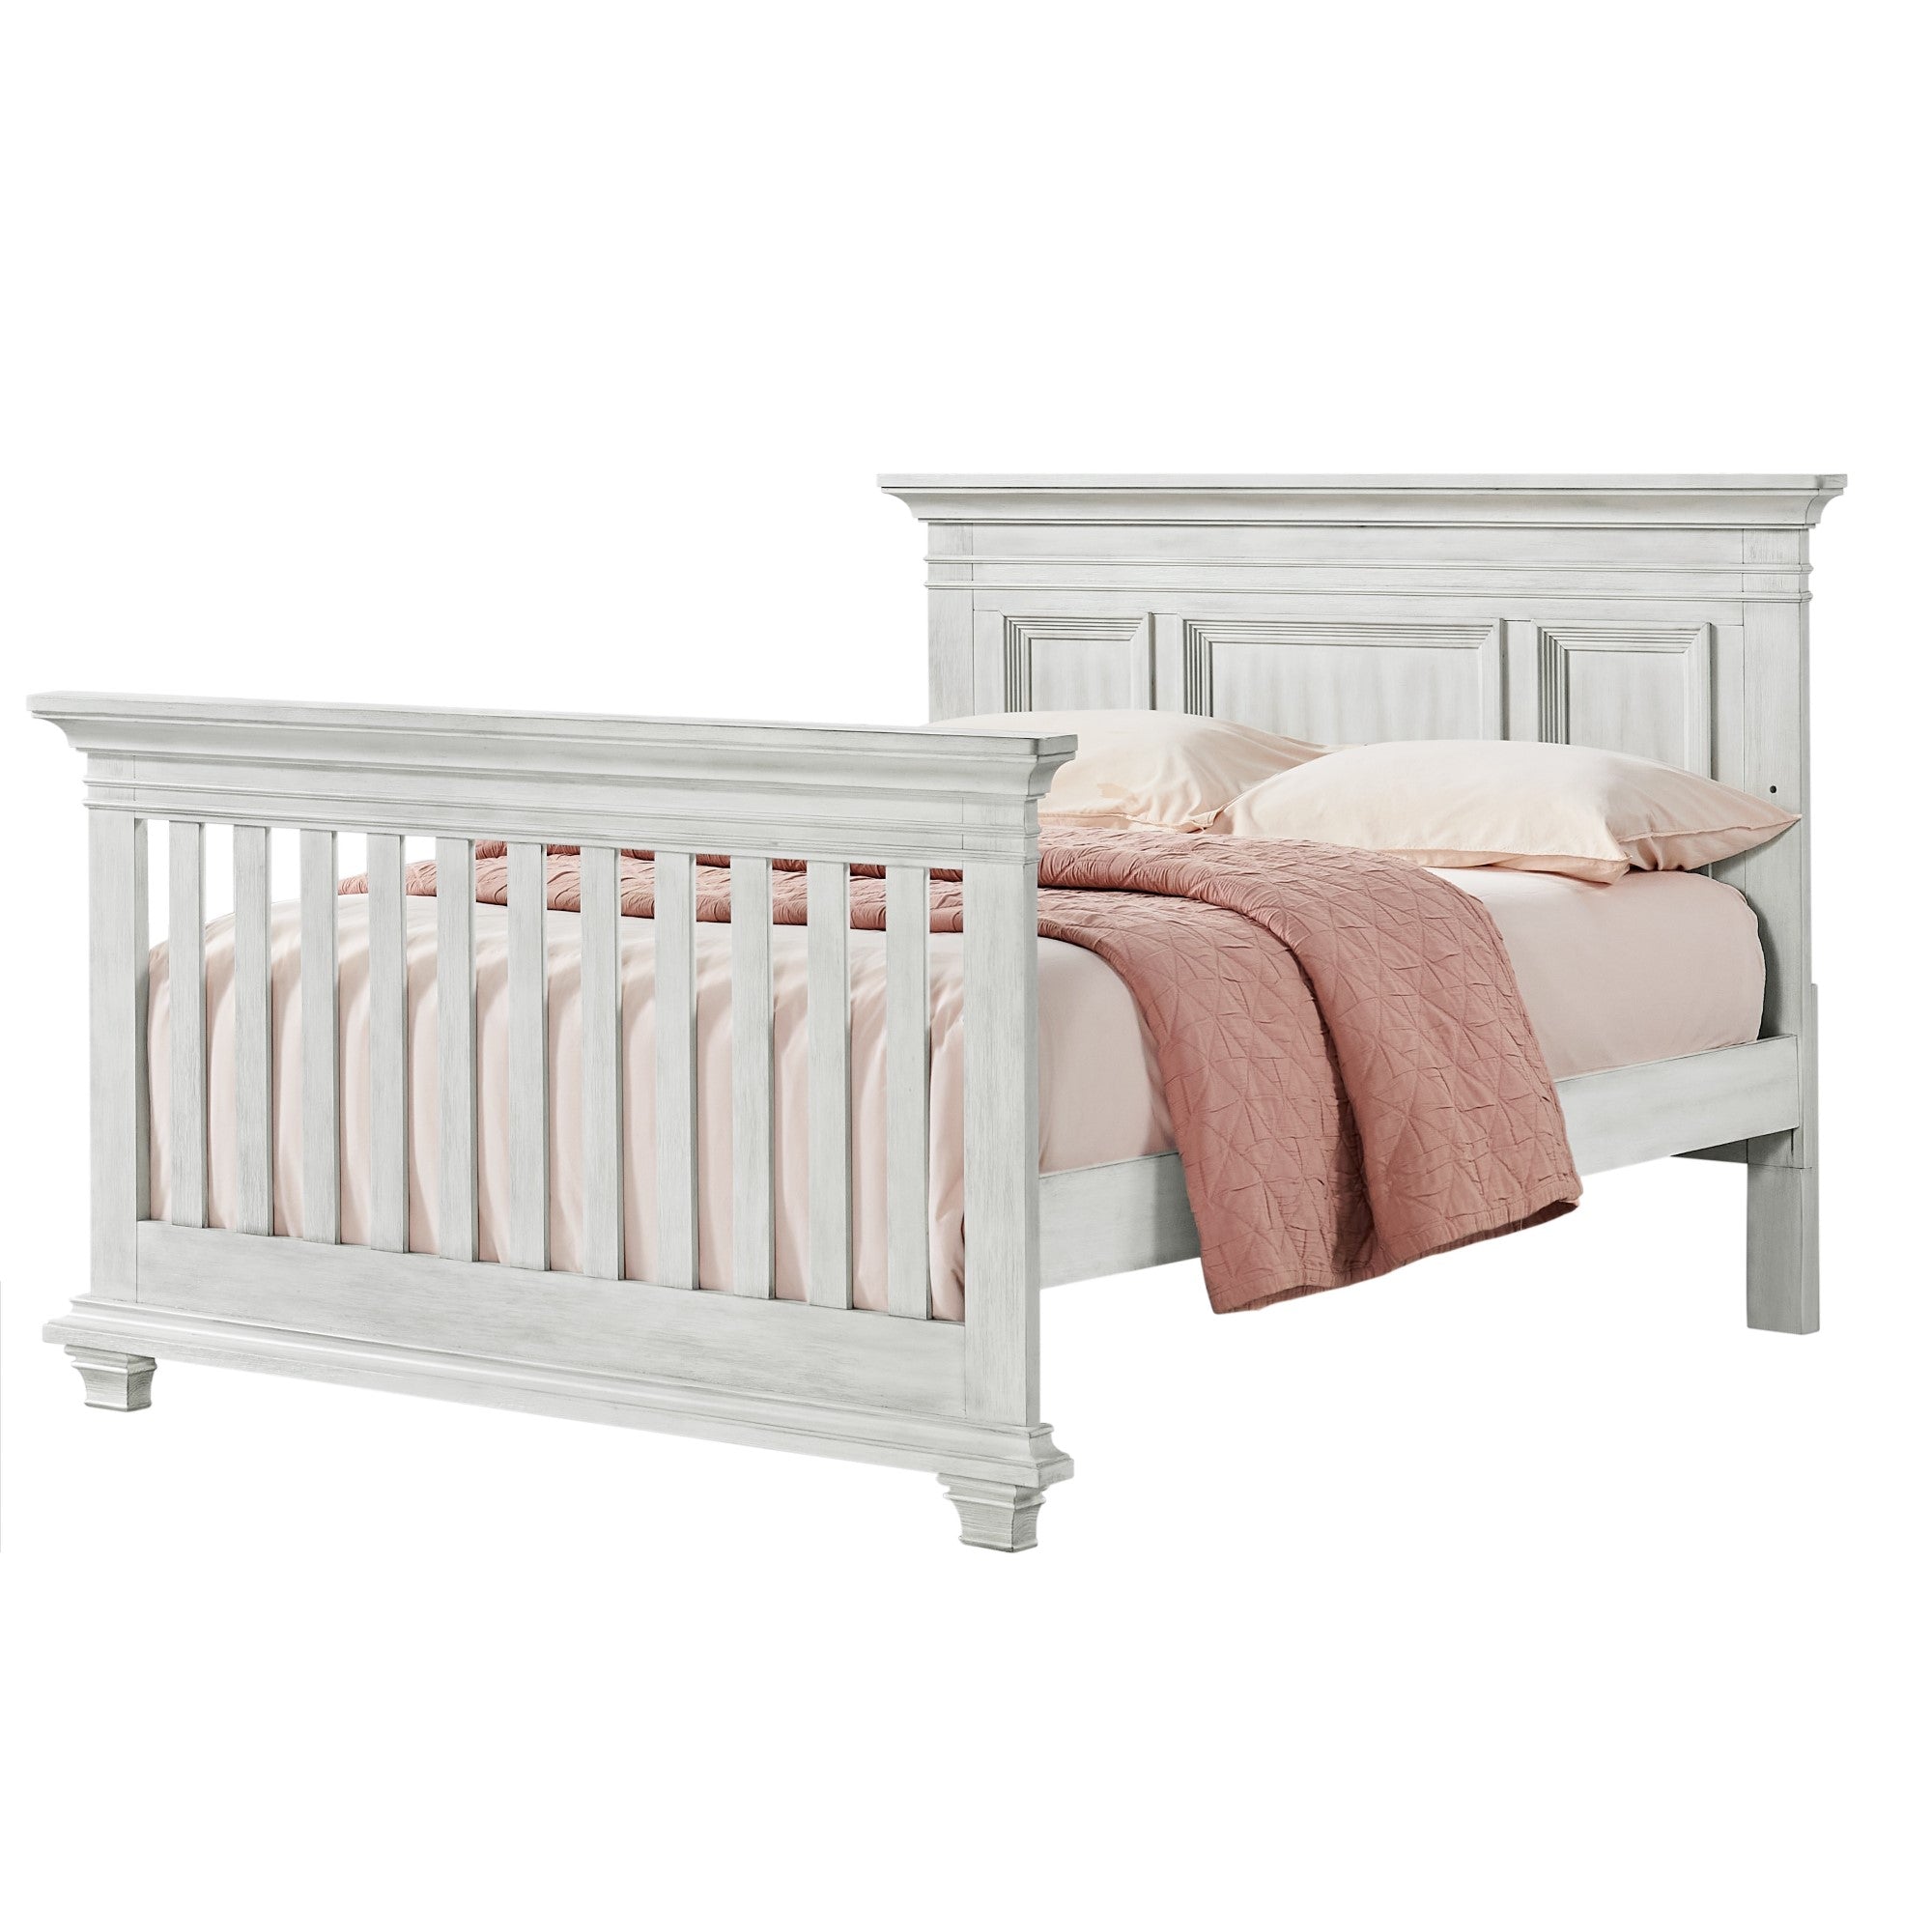 Oxford Baby Weston Full Bed Conversion Kit